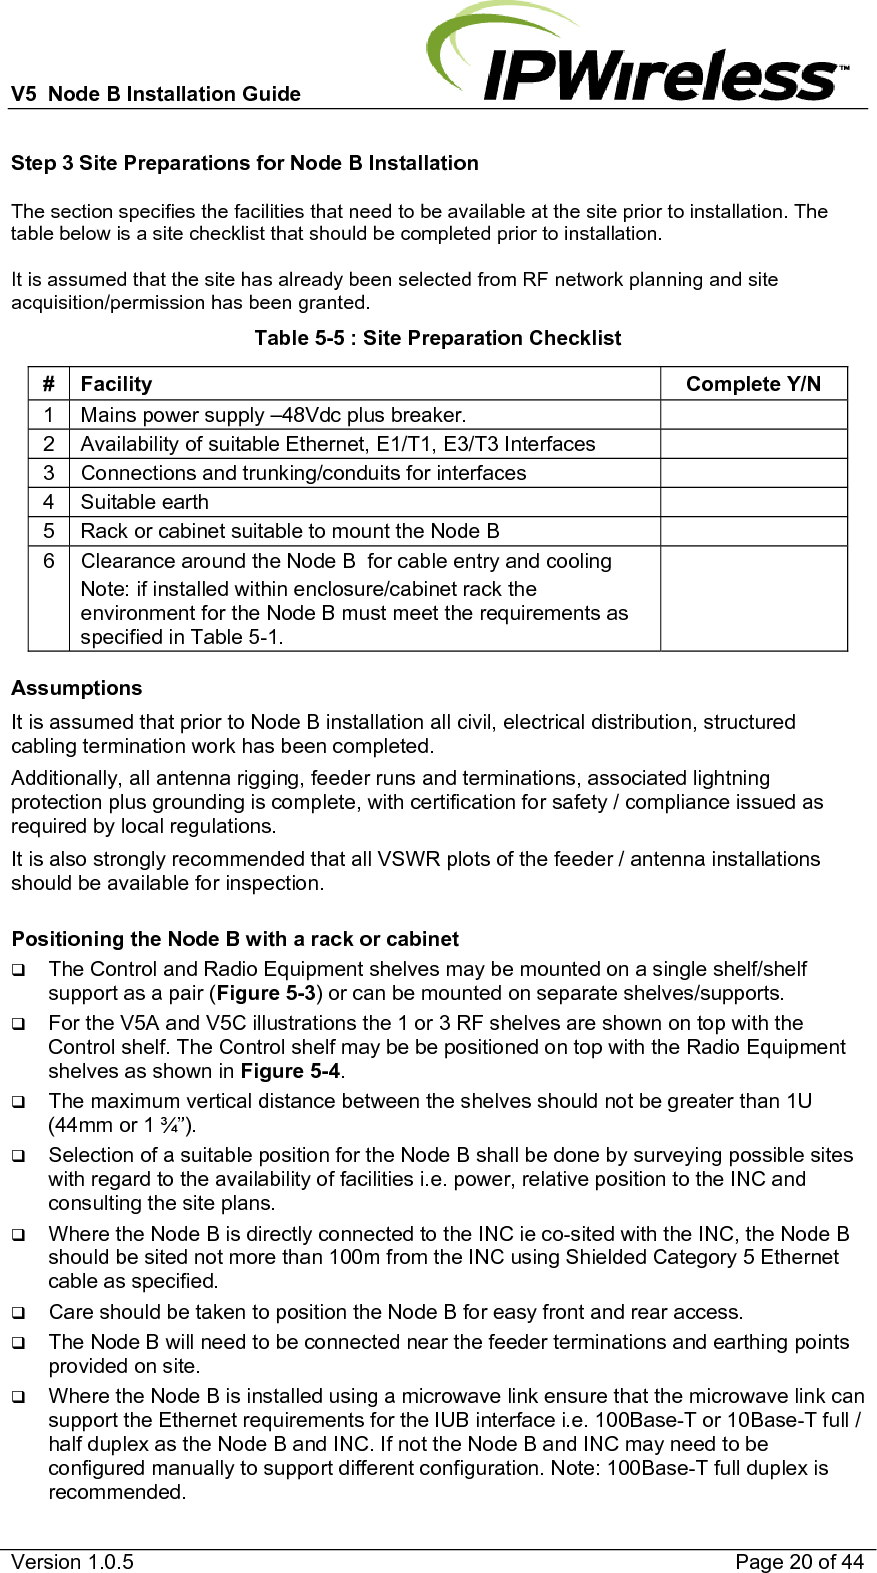 V5  Node B Installation Guide                           Version 1.0.5    Page 20 of 44 Step 3 Site Preparations for Node B Installation The section specifies the facilities that need to be available at the site prior to installation. The table below is a site checklist that should be completed prior to installation.  It is assumed that the site has already been selected from RF network planning and site acquisition/permission has been granted. Table 5-5 : Site Preparation Checklist # Facility  Complete Y/N 1  Mains power supply –48Vdc plus breaker.   2  Availability of suitable Ethernet, E1/T1, E3/T3 Interfaces   3  Connections and trunking/conduits for interfaces   4 Suitable earth   5  Rack or cabinet suitable to mount the Node B   6  Clearance around the Node B  for cable entry and cooling Note: if installed within enclosure/cabinet rack the environment for the Node B must meet the requirements as specified in Table 5-1.   Assumptions It is assumed that prior to Node B installation all civil, electrical distribution, structured cabling termination work has been completed. Additionally, all antenna rigging, feeder runs and terminations, associated lightning protection plus grounding is complete, with certification for safety / compliance issued as required by local regulations.  It is also strongly recommended that all VSWR plots of the feeder / antenna installations should be available for inspection.  Positioning the Node B with a rack or cabinet  The Control and Radio Equipment shelves may be mounted on a single shelf/shelf support as a pair (Figure 5-3) or can be mounted on separate shelves/supports.  For the V5A and V5C illustrations the 1 or 3 RF shelves are shown on top with the Control shelf. The Control shelf may be be positioned on top with the Radio Equipment shelves as shown in Figure 5-4.  The maximum vertical distance between the shelves should not be greater than 1U (44mm or 1 ¾”).  Selection of a suitable position for the Node B shall be done by surveying possible sites with regard to the availability of facilities i.e. power, relative position to the INC and consulting the site plans.  Where the Node B is directly connected to the INC ie co-sited with the INC, the Node B should be sited not more than 100m from the INC using Shielded Category 5 Ethernet cable as specified.  Care should be taken to position the Node B for easy front and rear access.  The Node B will need to be connected near the feeder terminations and earthing points provided on site.  Where the Node B is installed using a microwave link ensure that the microwave link can support the Ethernet requirements for the IUB interface i.e. 100Base-T or 10Base-T full / half duplex as the Node B and INC. If not the Node B and INC may need to be configured manually to support different configuration. Note: 100Base-T full duplex is recommended. 